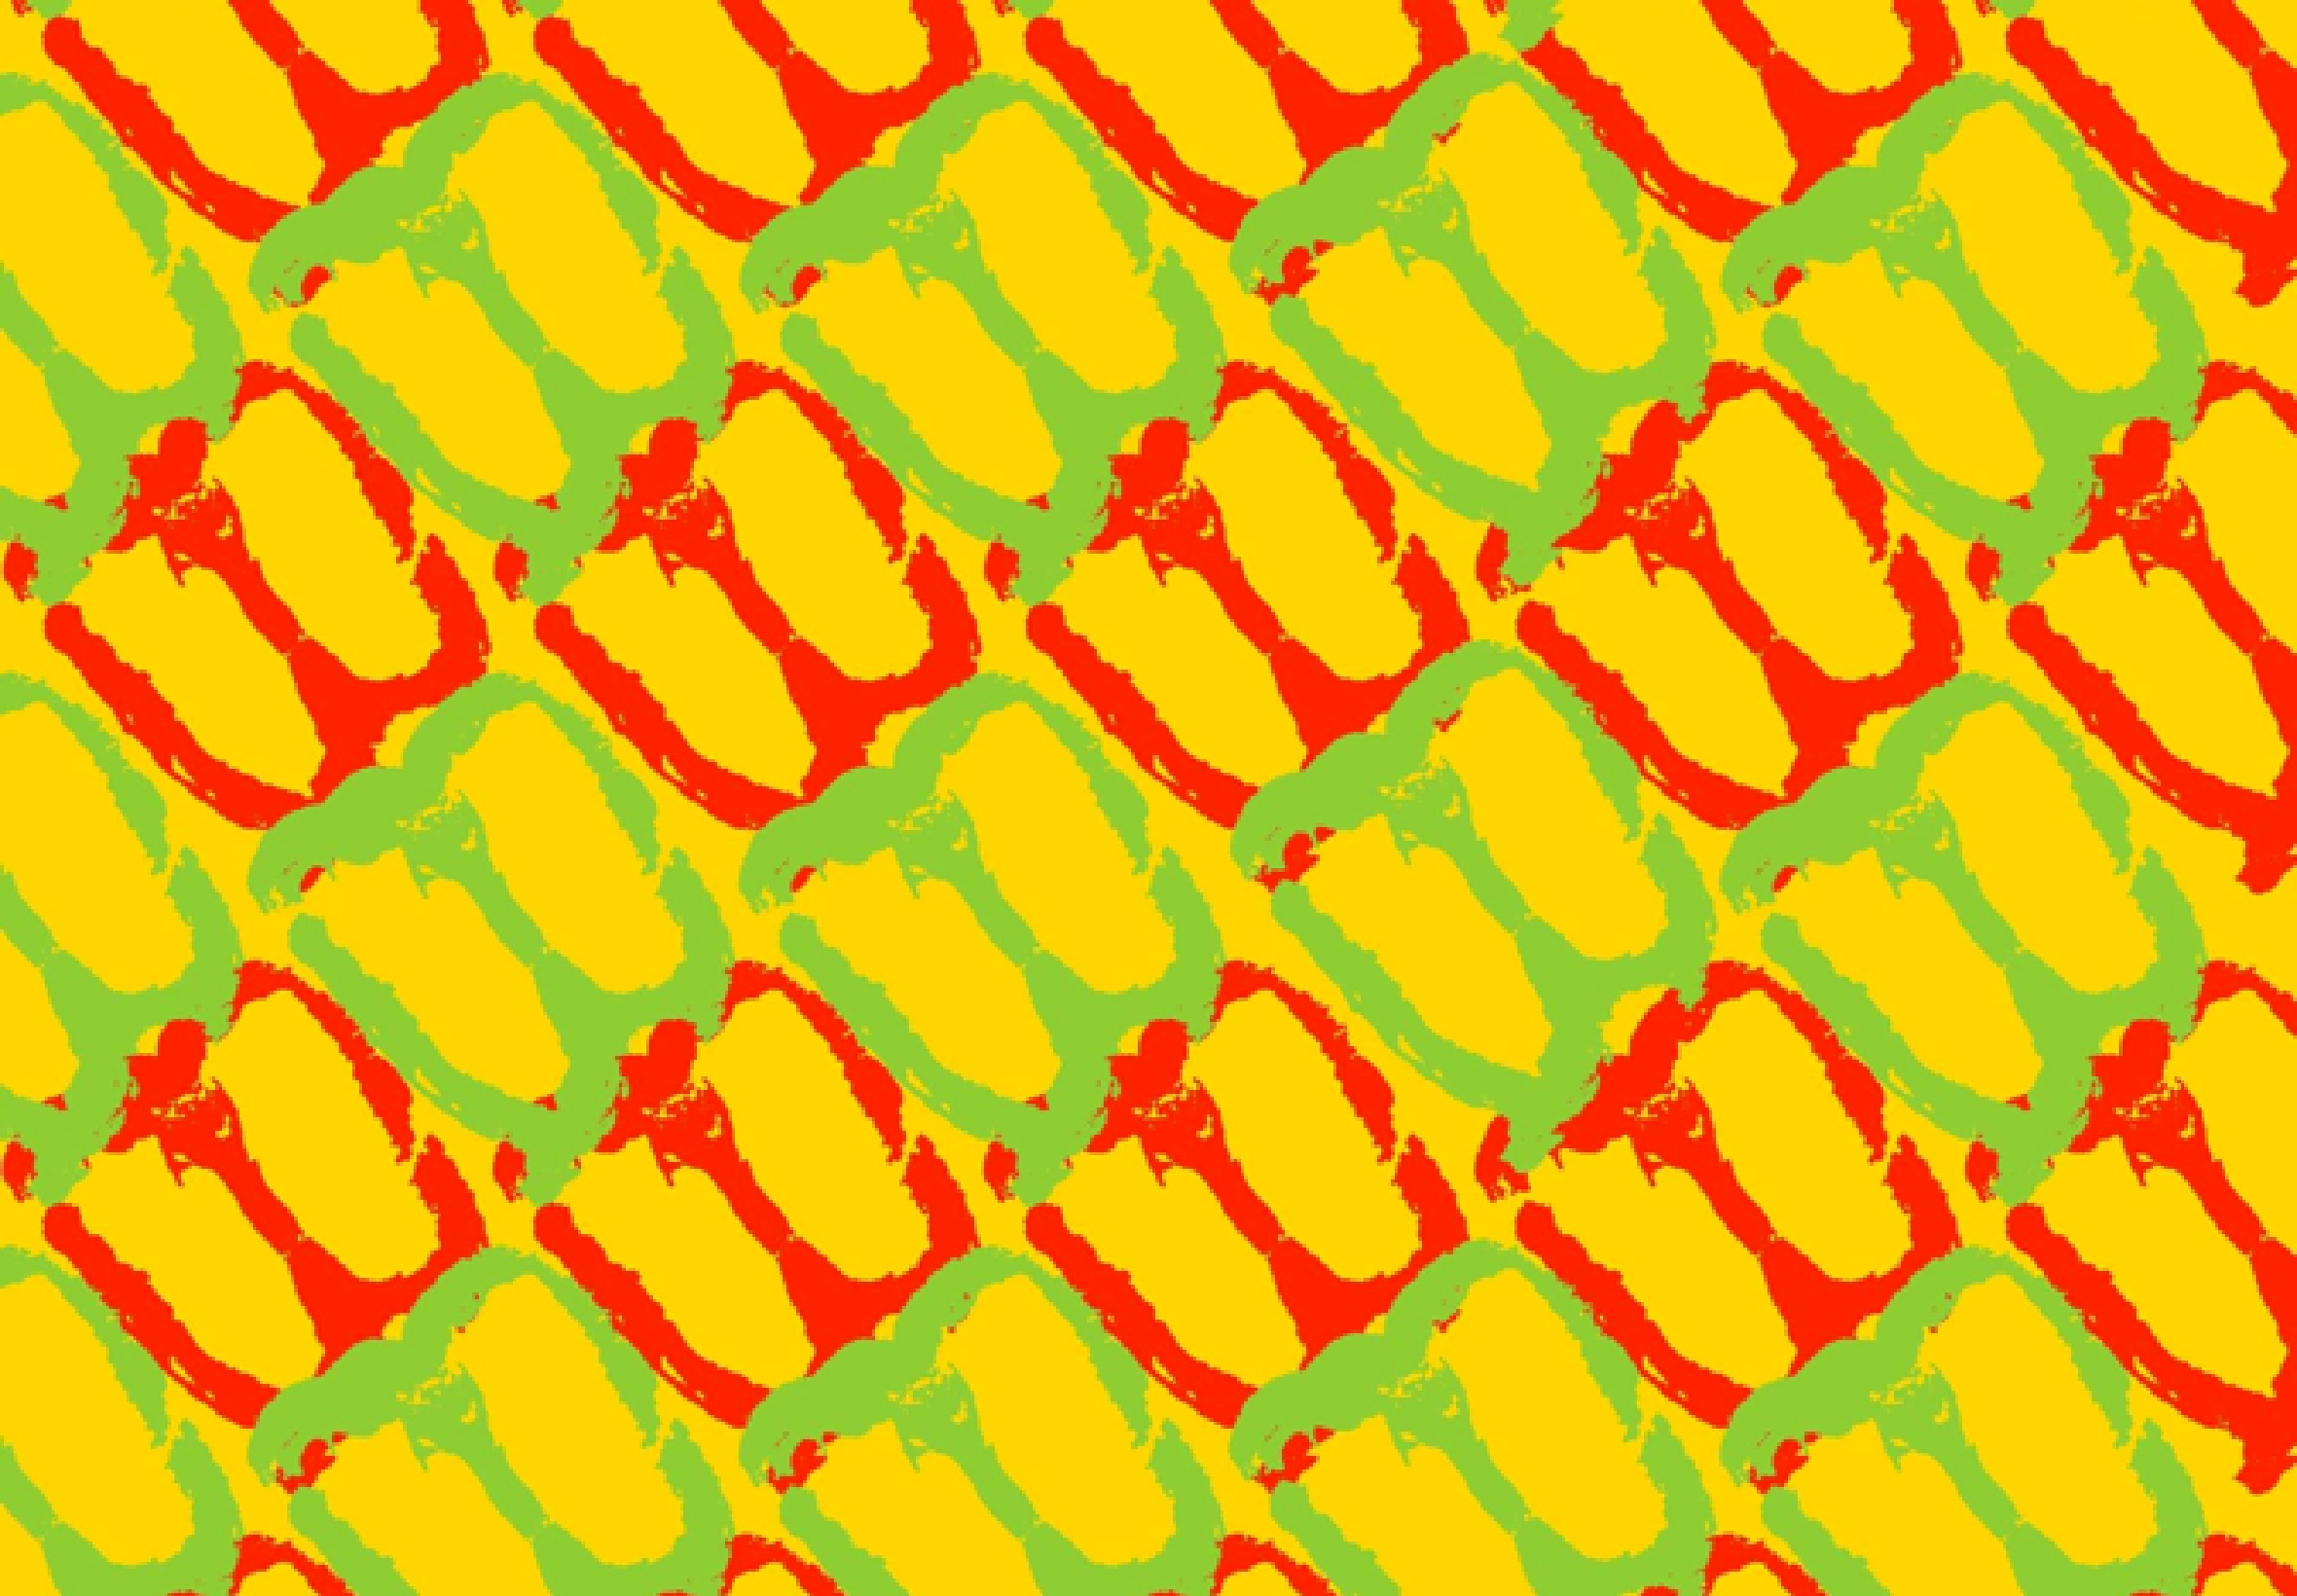 Image of a pattern created with monoprinting bell peppers, digitally created with bright neon colours.